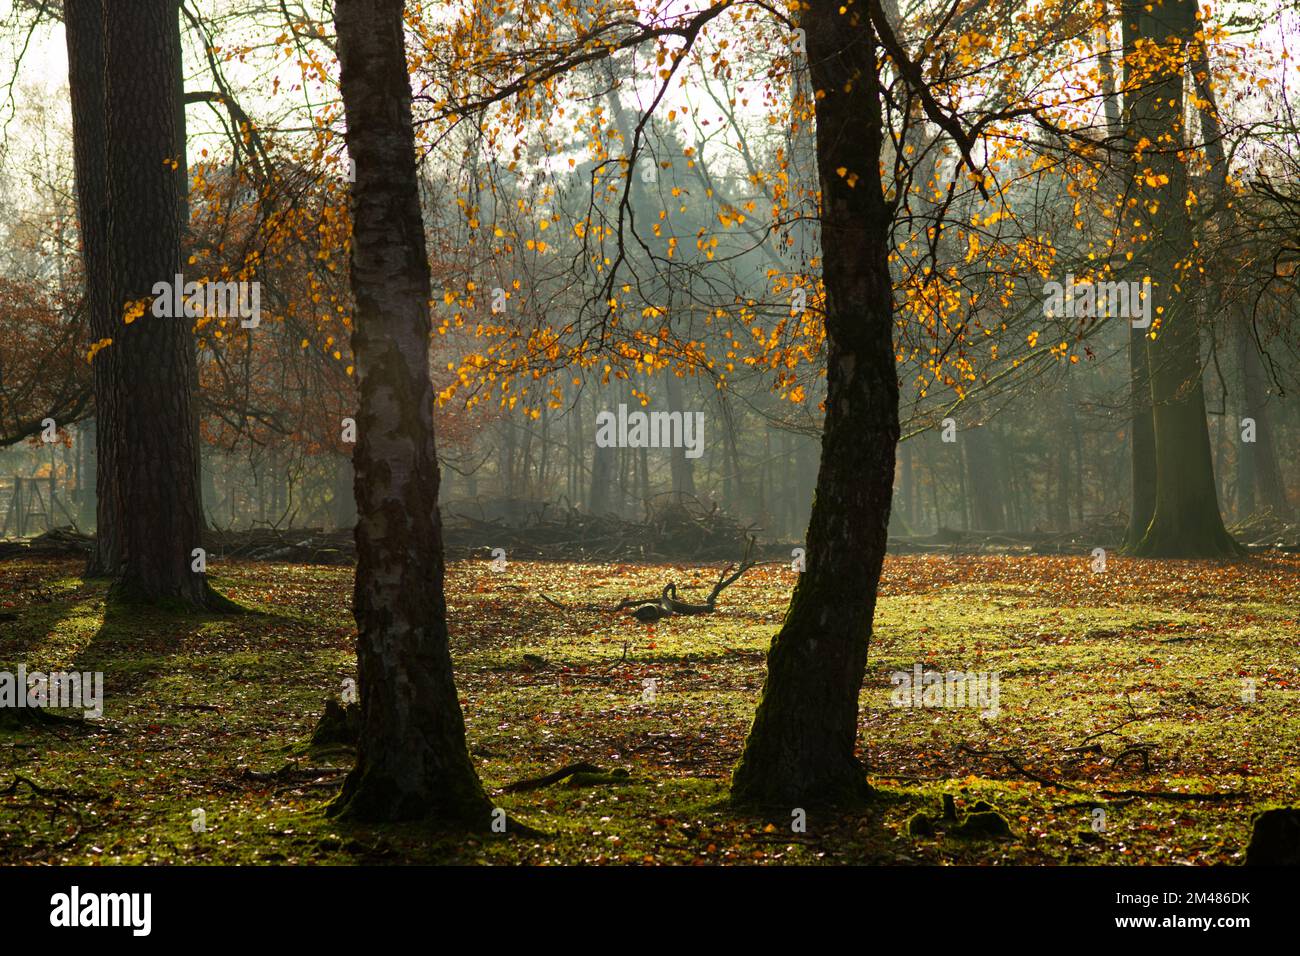 atmospheric forest scenery with yellow-brownish leaves Stock Photo